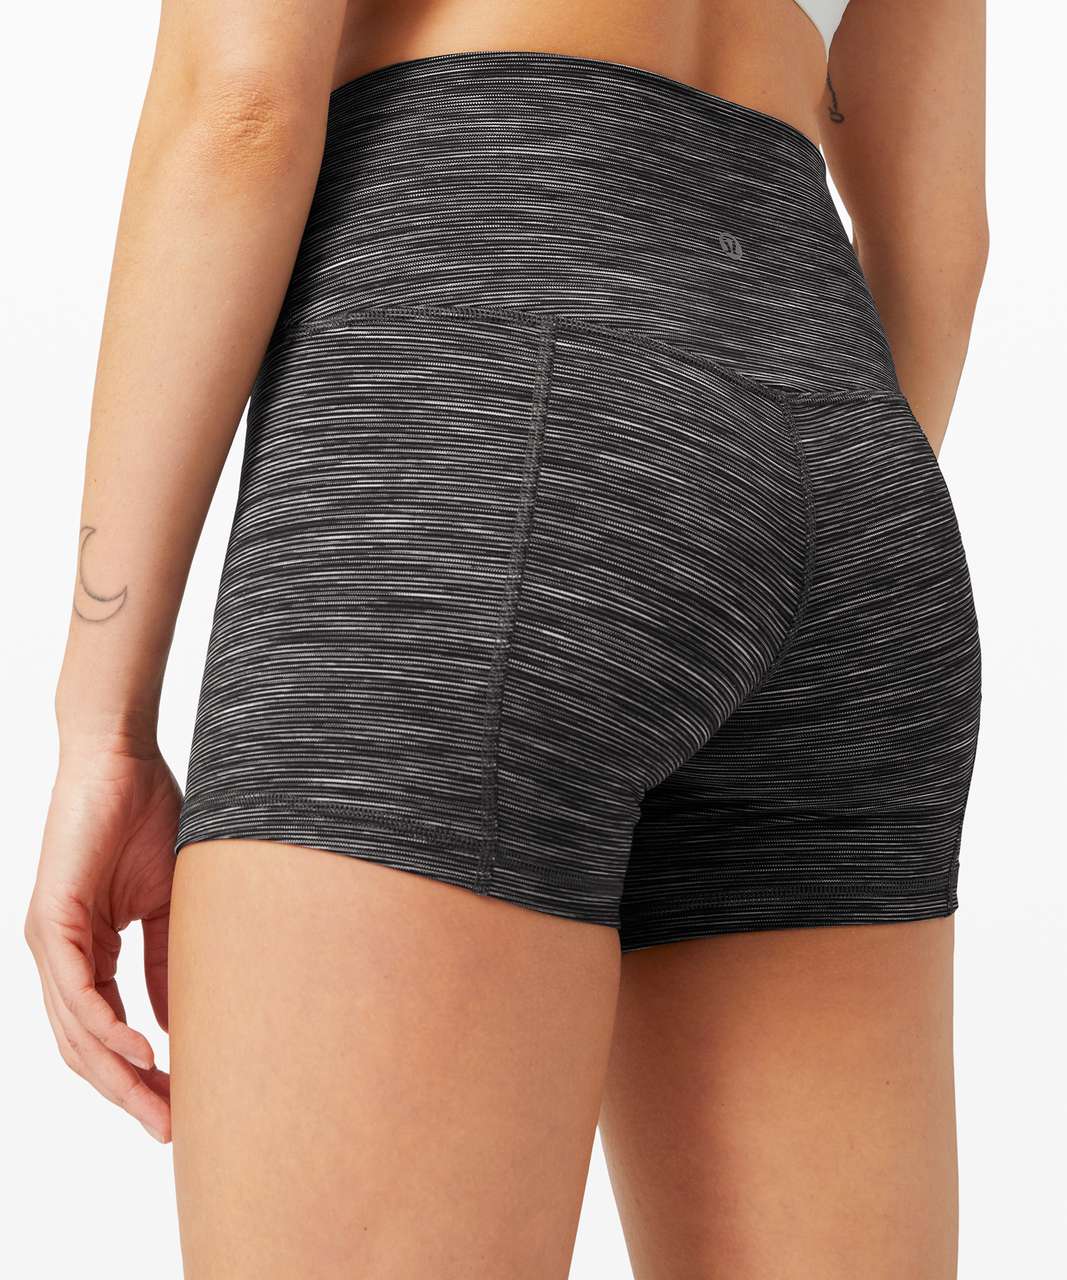 Lululemon Align Short 4" - Wee Are From Space Dark Carbon Ice Grey